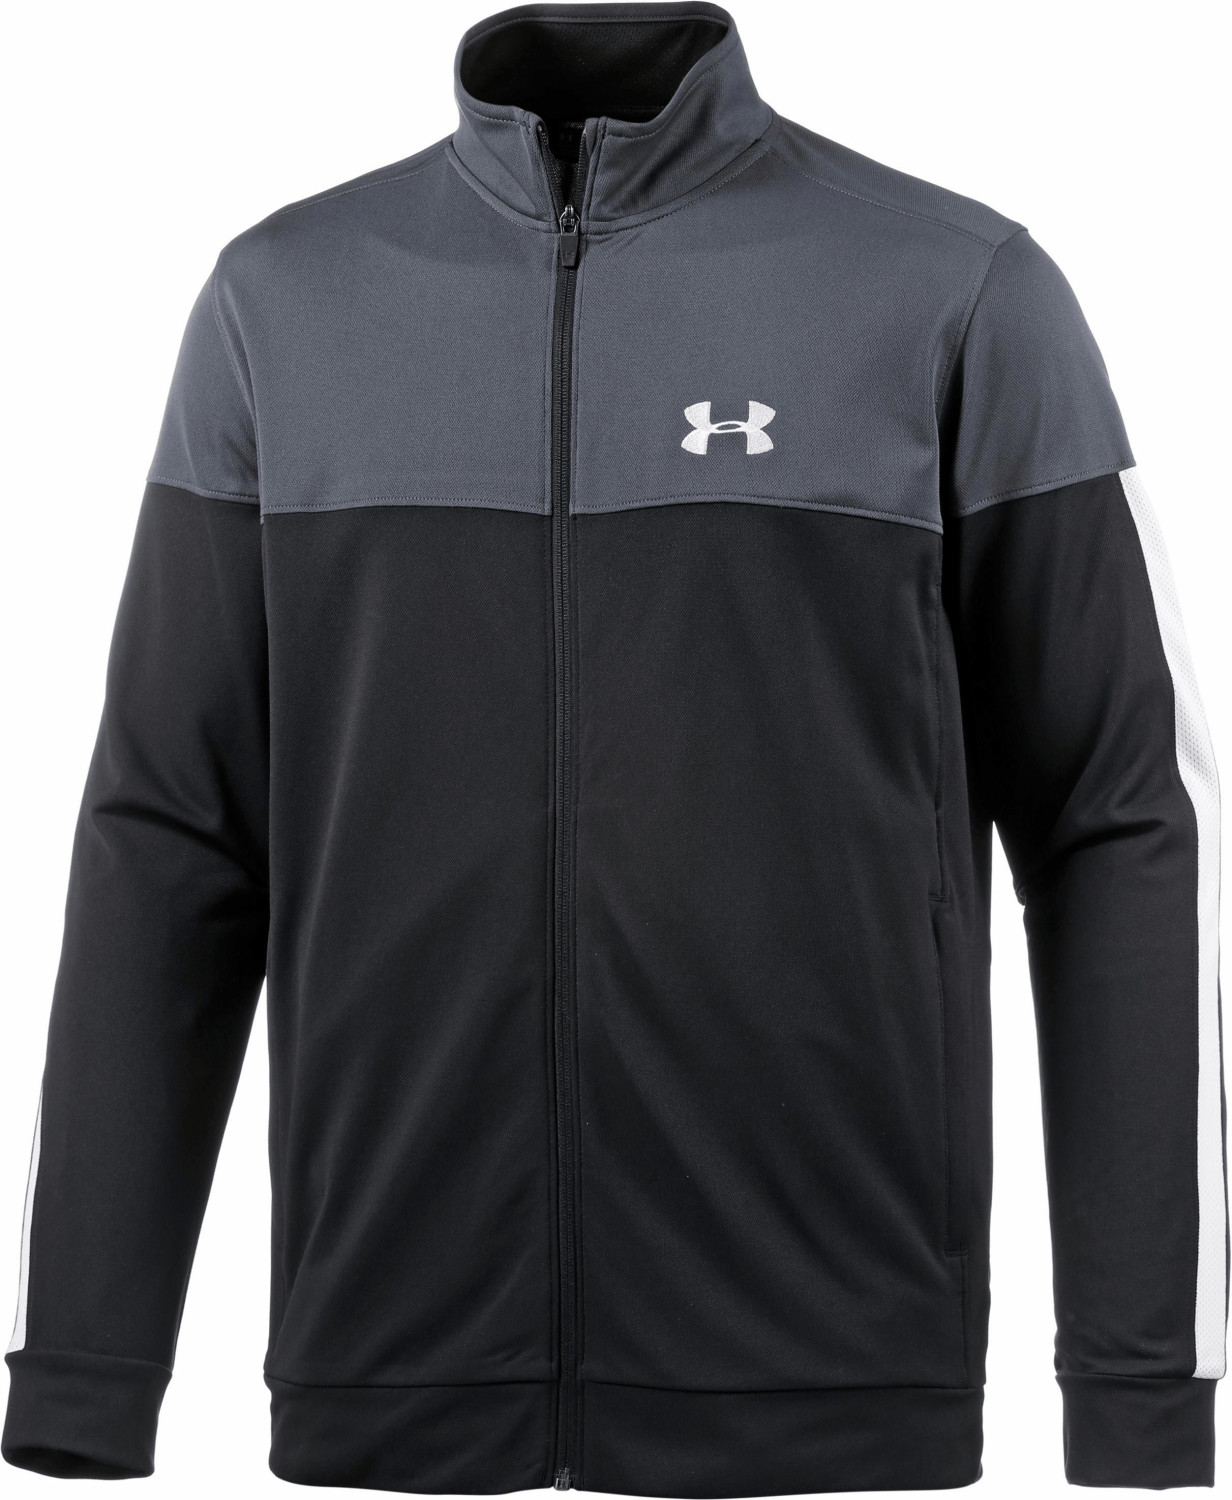 Buy Under Armour Sportstyle Pique Jacket gray (008) from £26.48 (Today ...